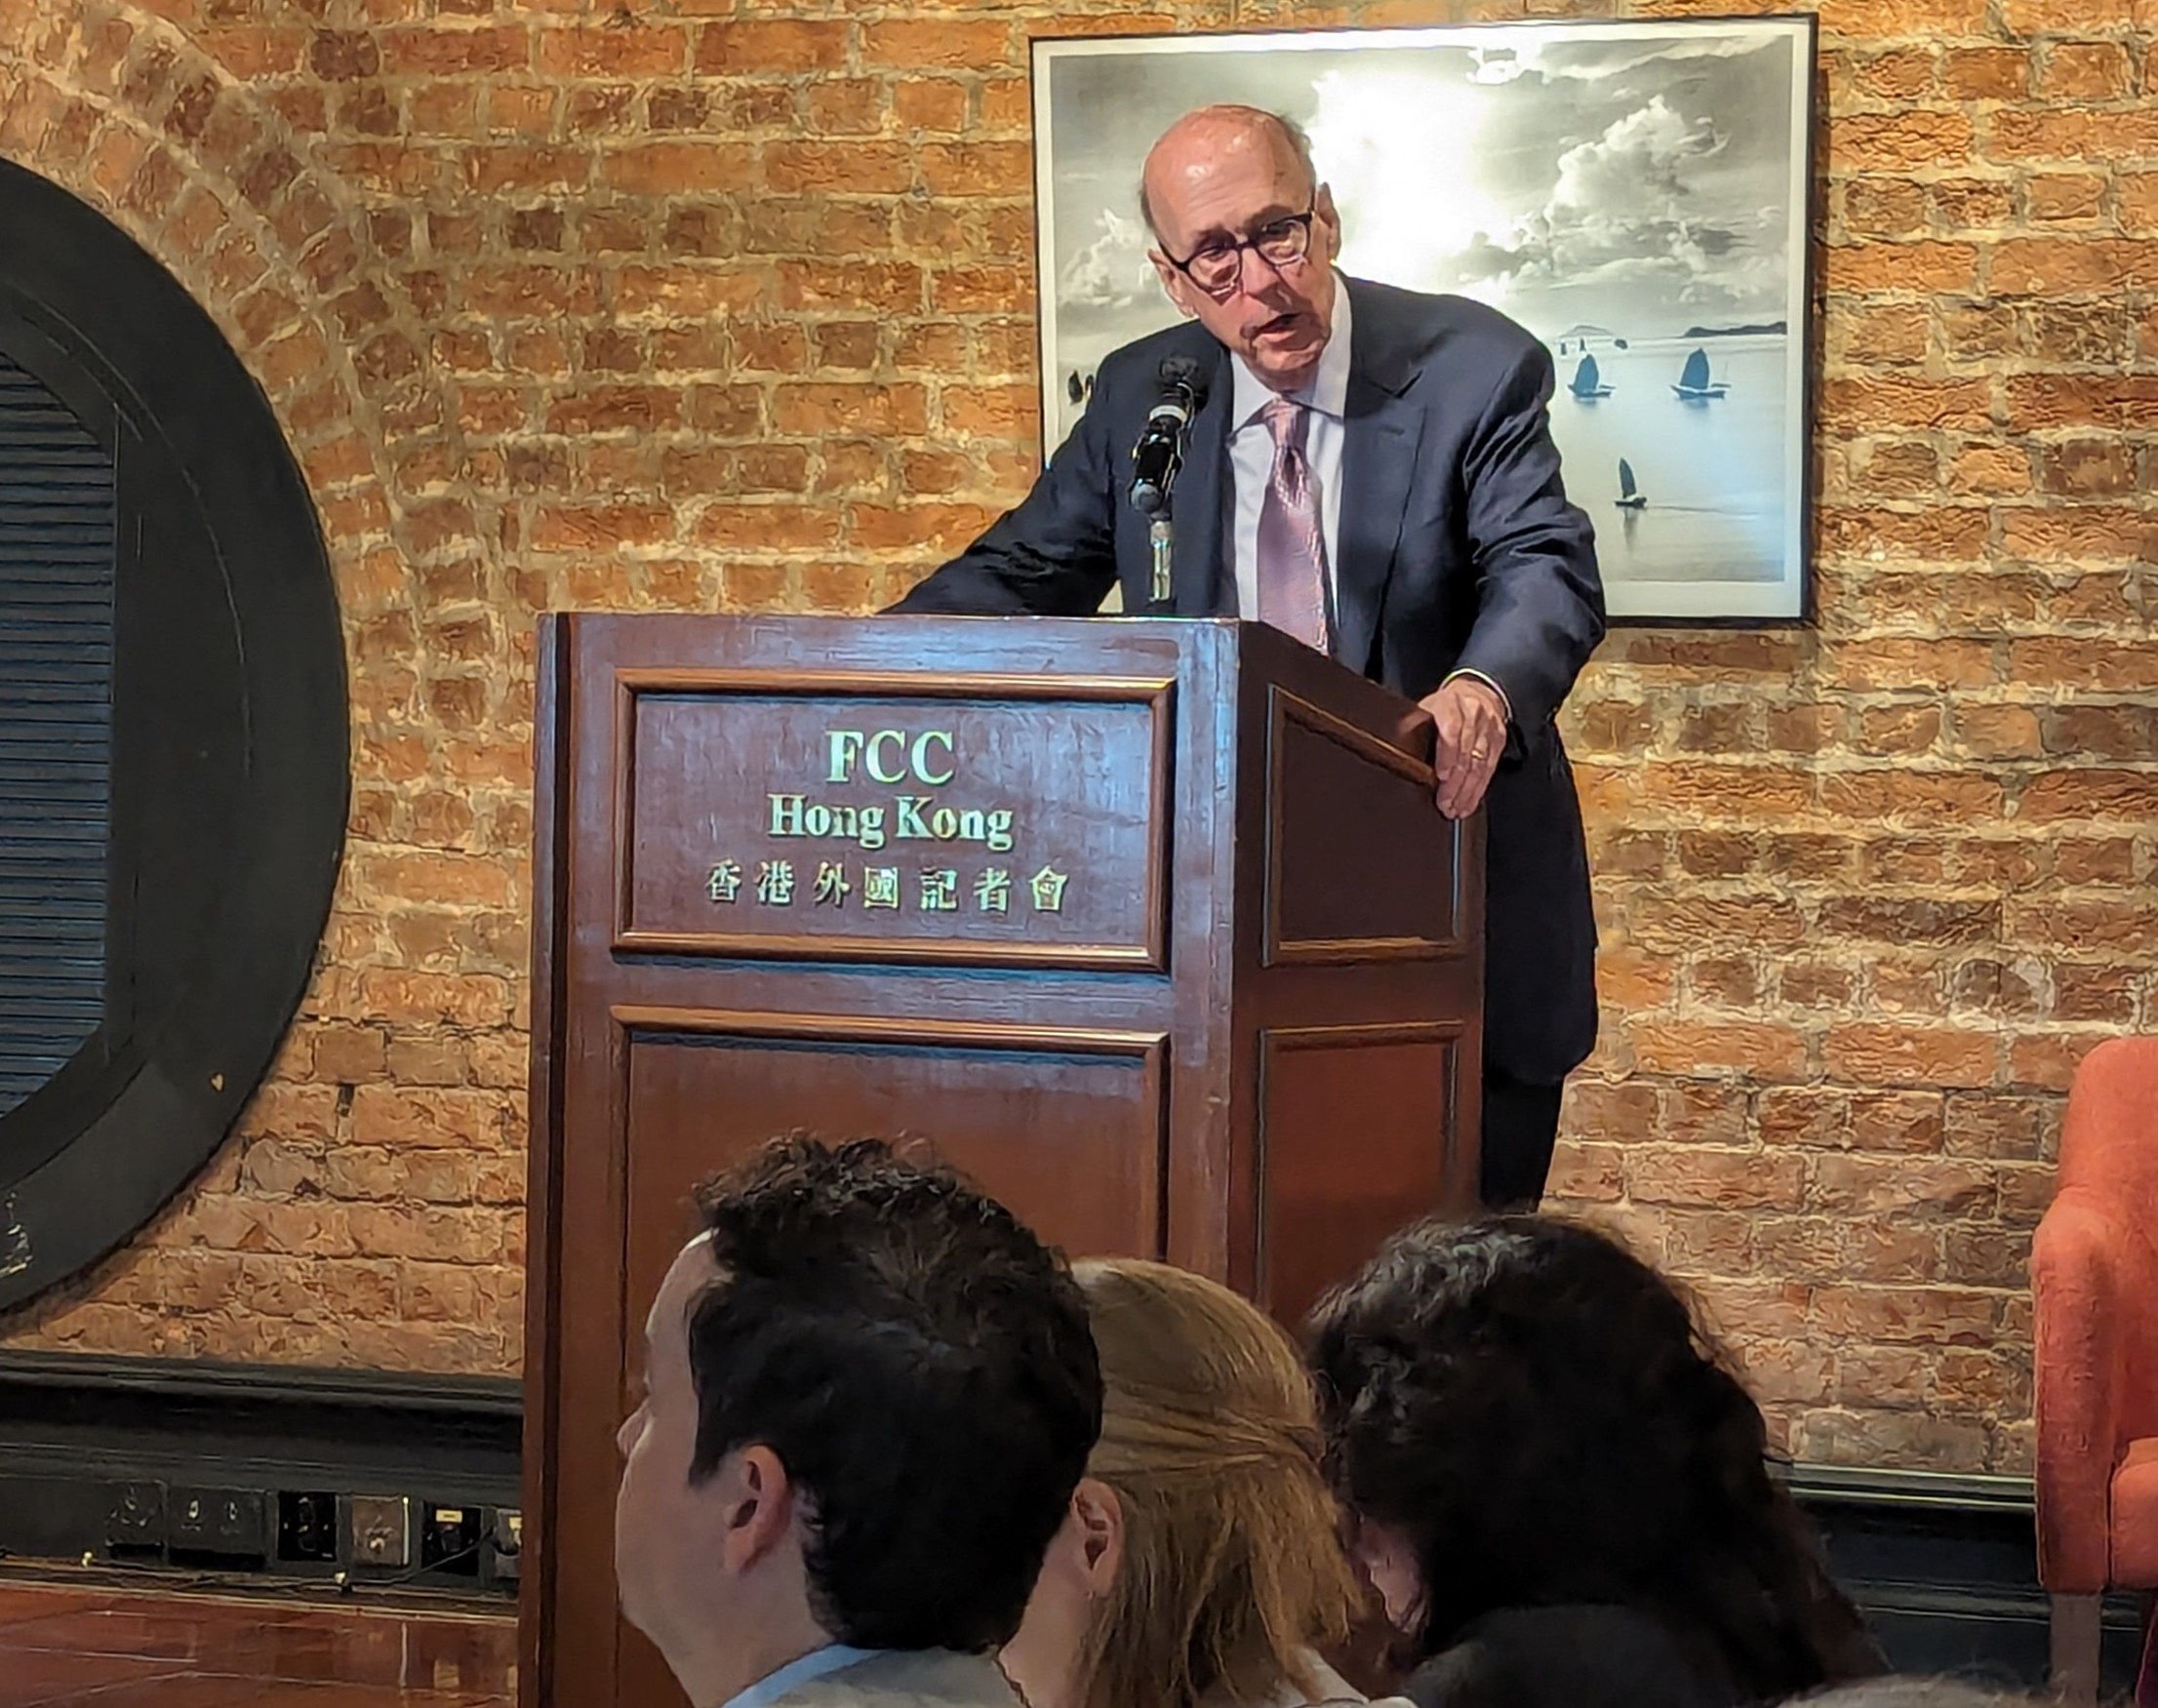 Stephen Roach, the former chairman of Morgan Stanley Asia, tells a gathering at the Foreign Correspondents’ Club that Hong Kong has to underline its special status to boost its economy. Photo: Kahon Chan